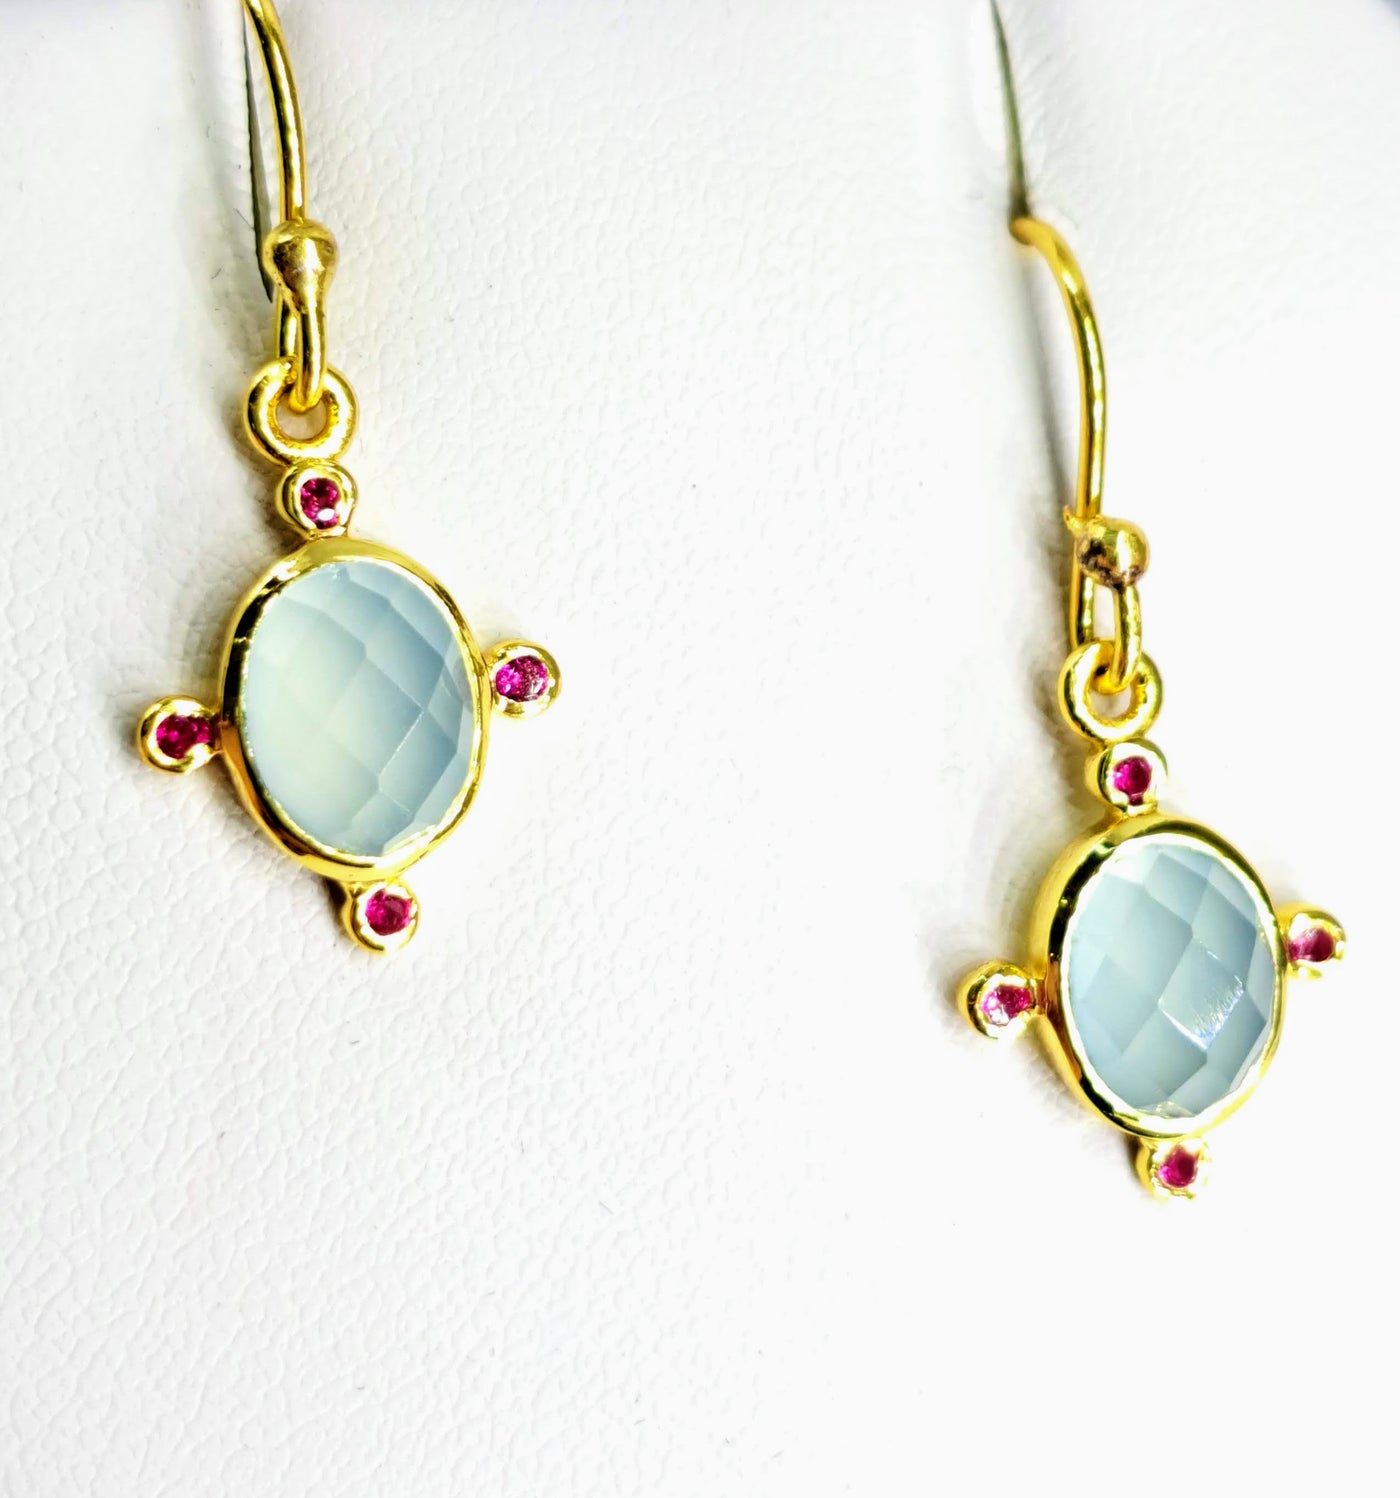 "Pop Of Color" 1" Earrings- Choose Chalcedony, Amethyst, Onyx or Rutilated Quartz with Tourmaline, 18K Gold Sterling